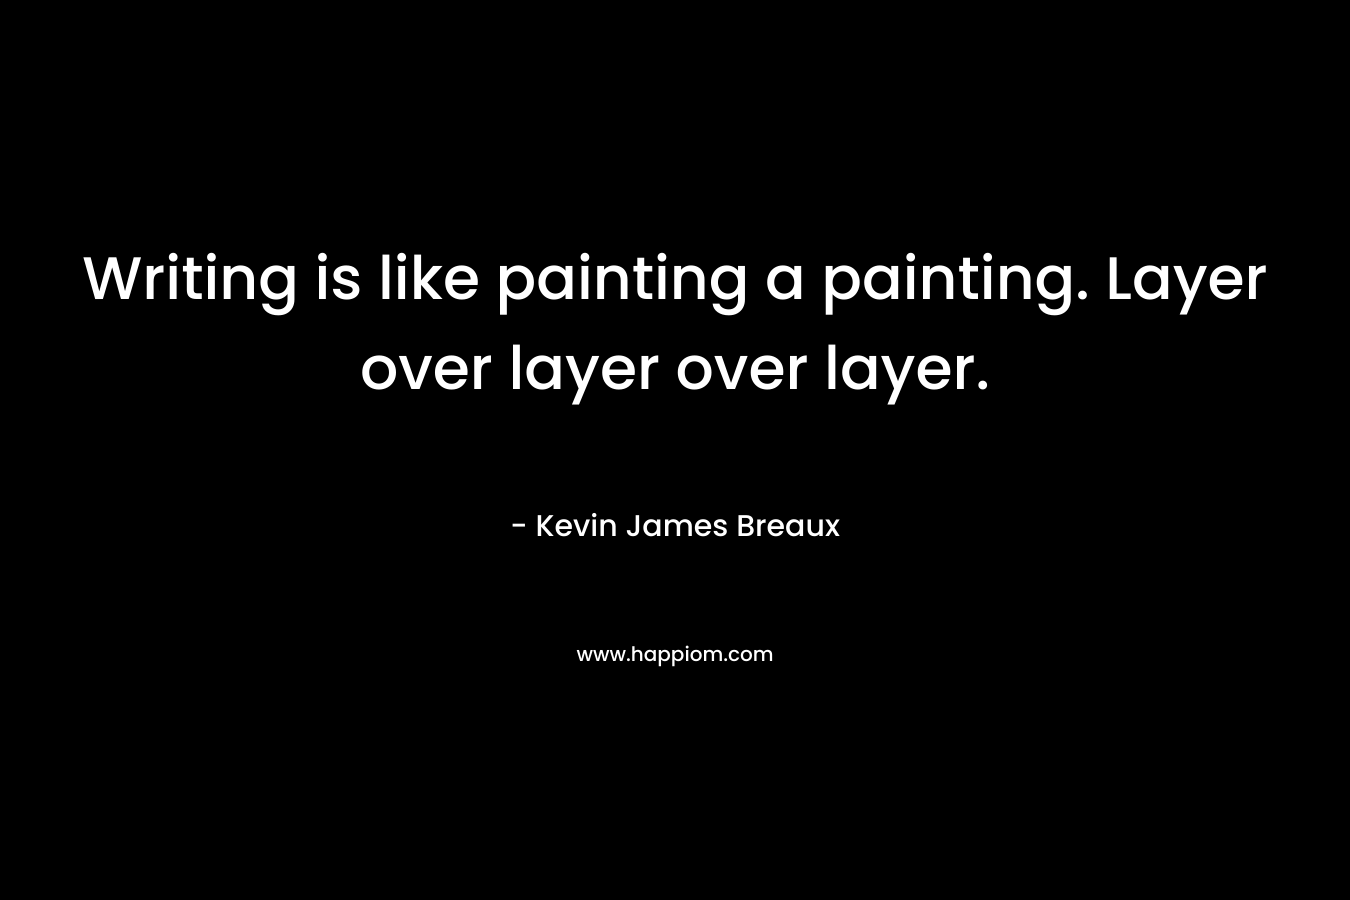 Writing is like painting a painting. Layer over layer over layer.